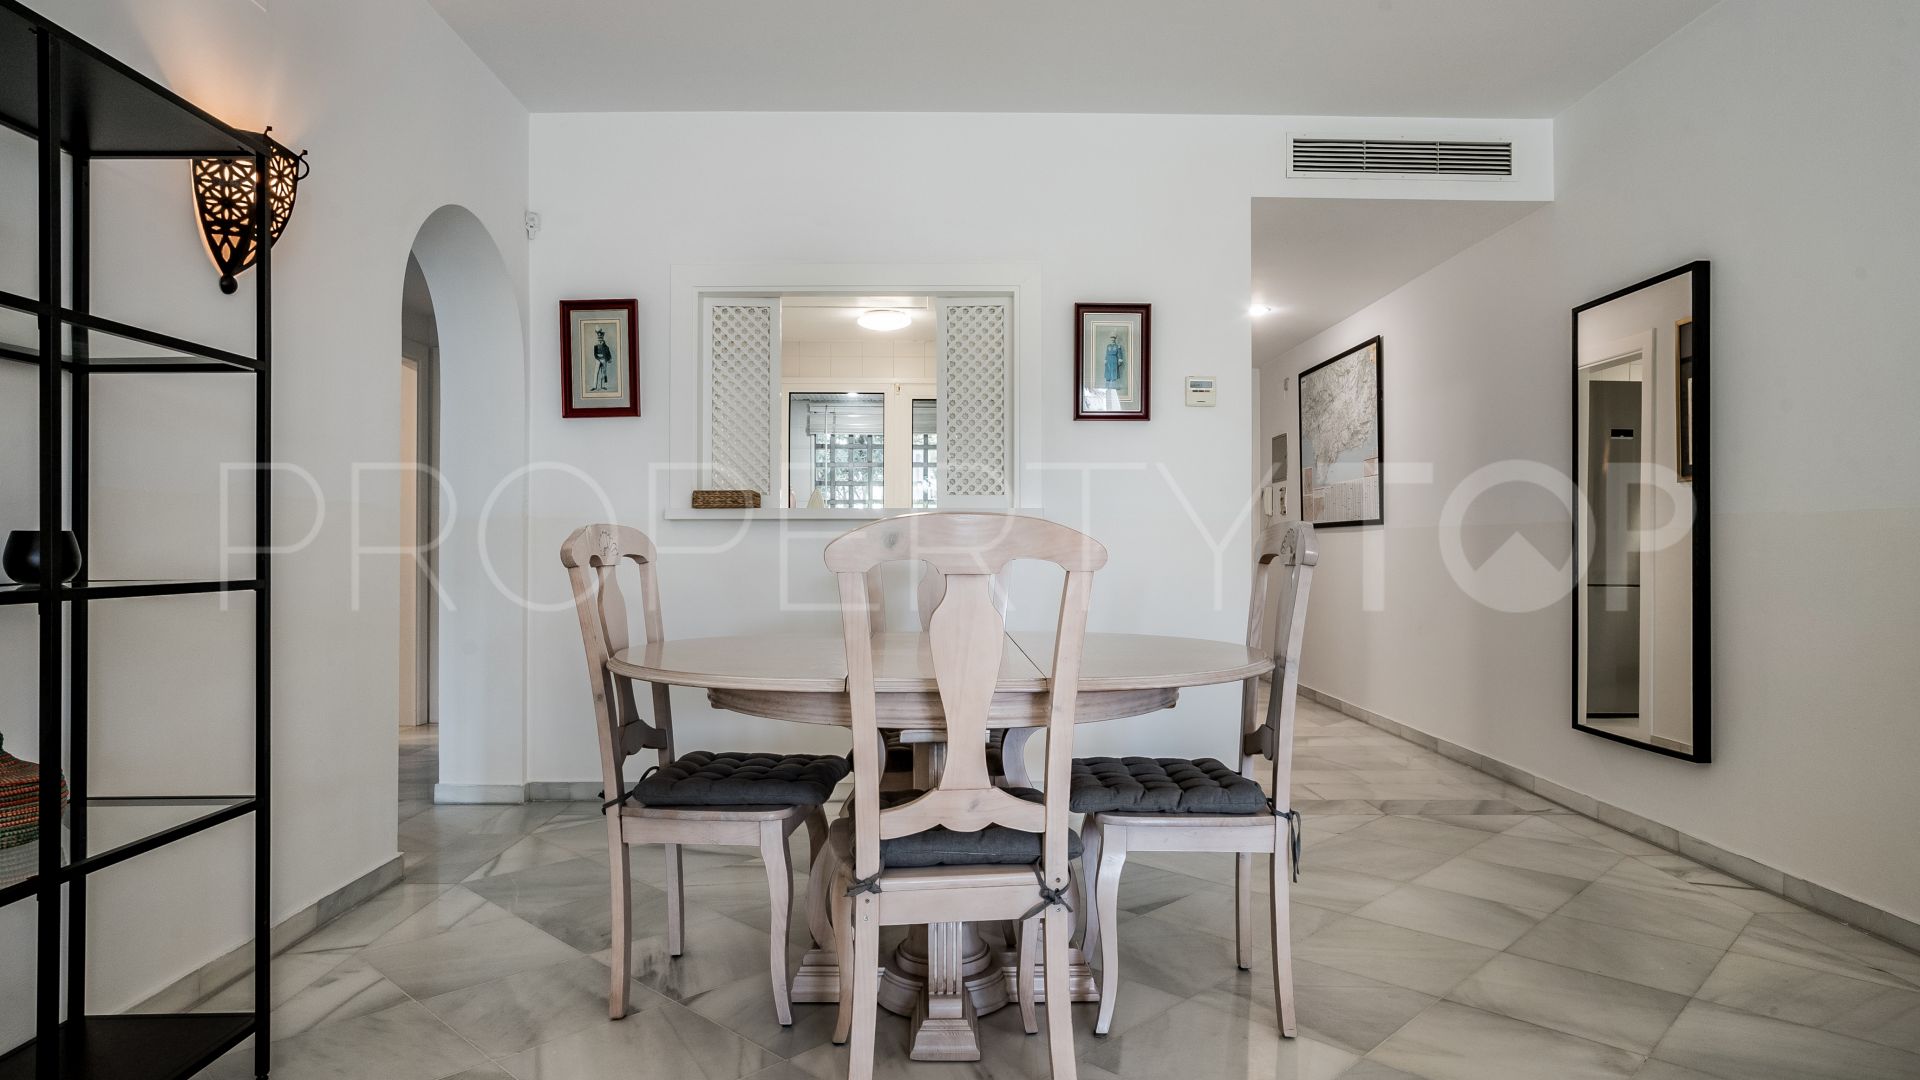 2 bedrooms ground floor apartment in Alhambra del Mar for sale